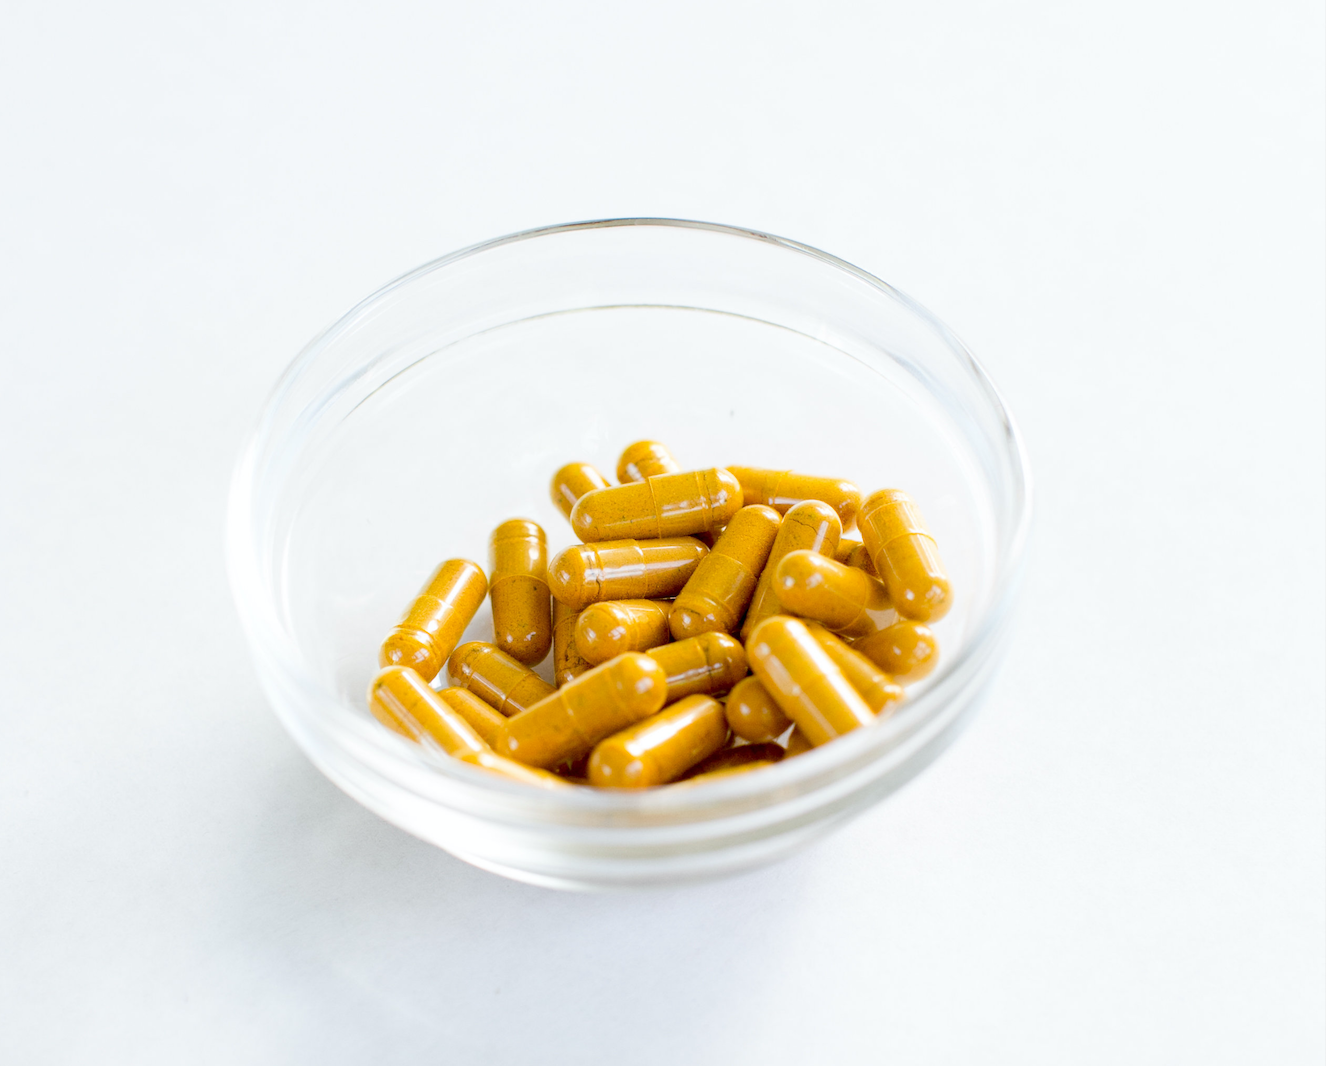 TURMERIC Capsules is how I incorporate Turmeric on a daily basis